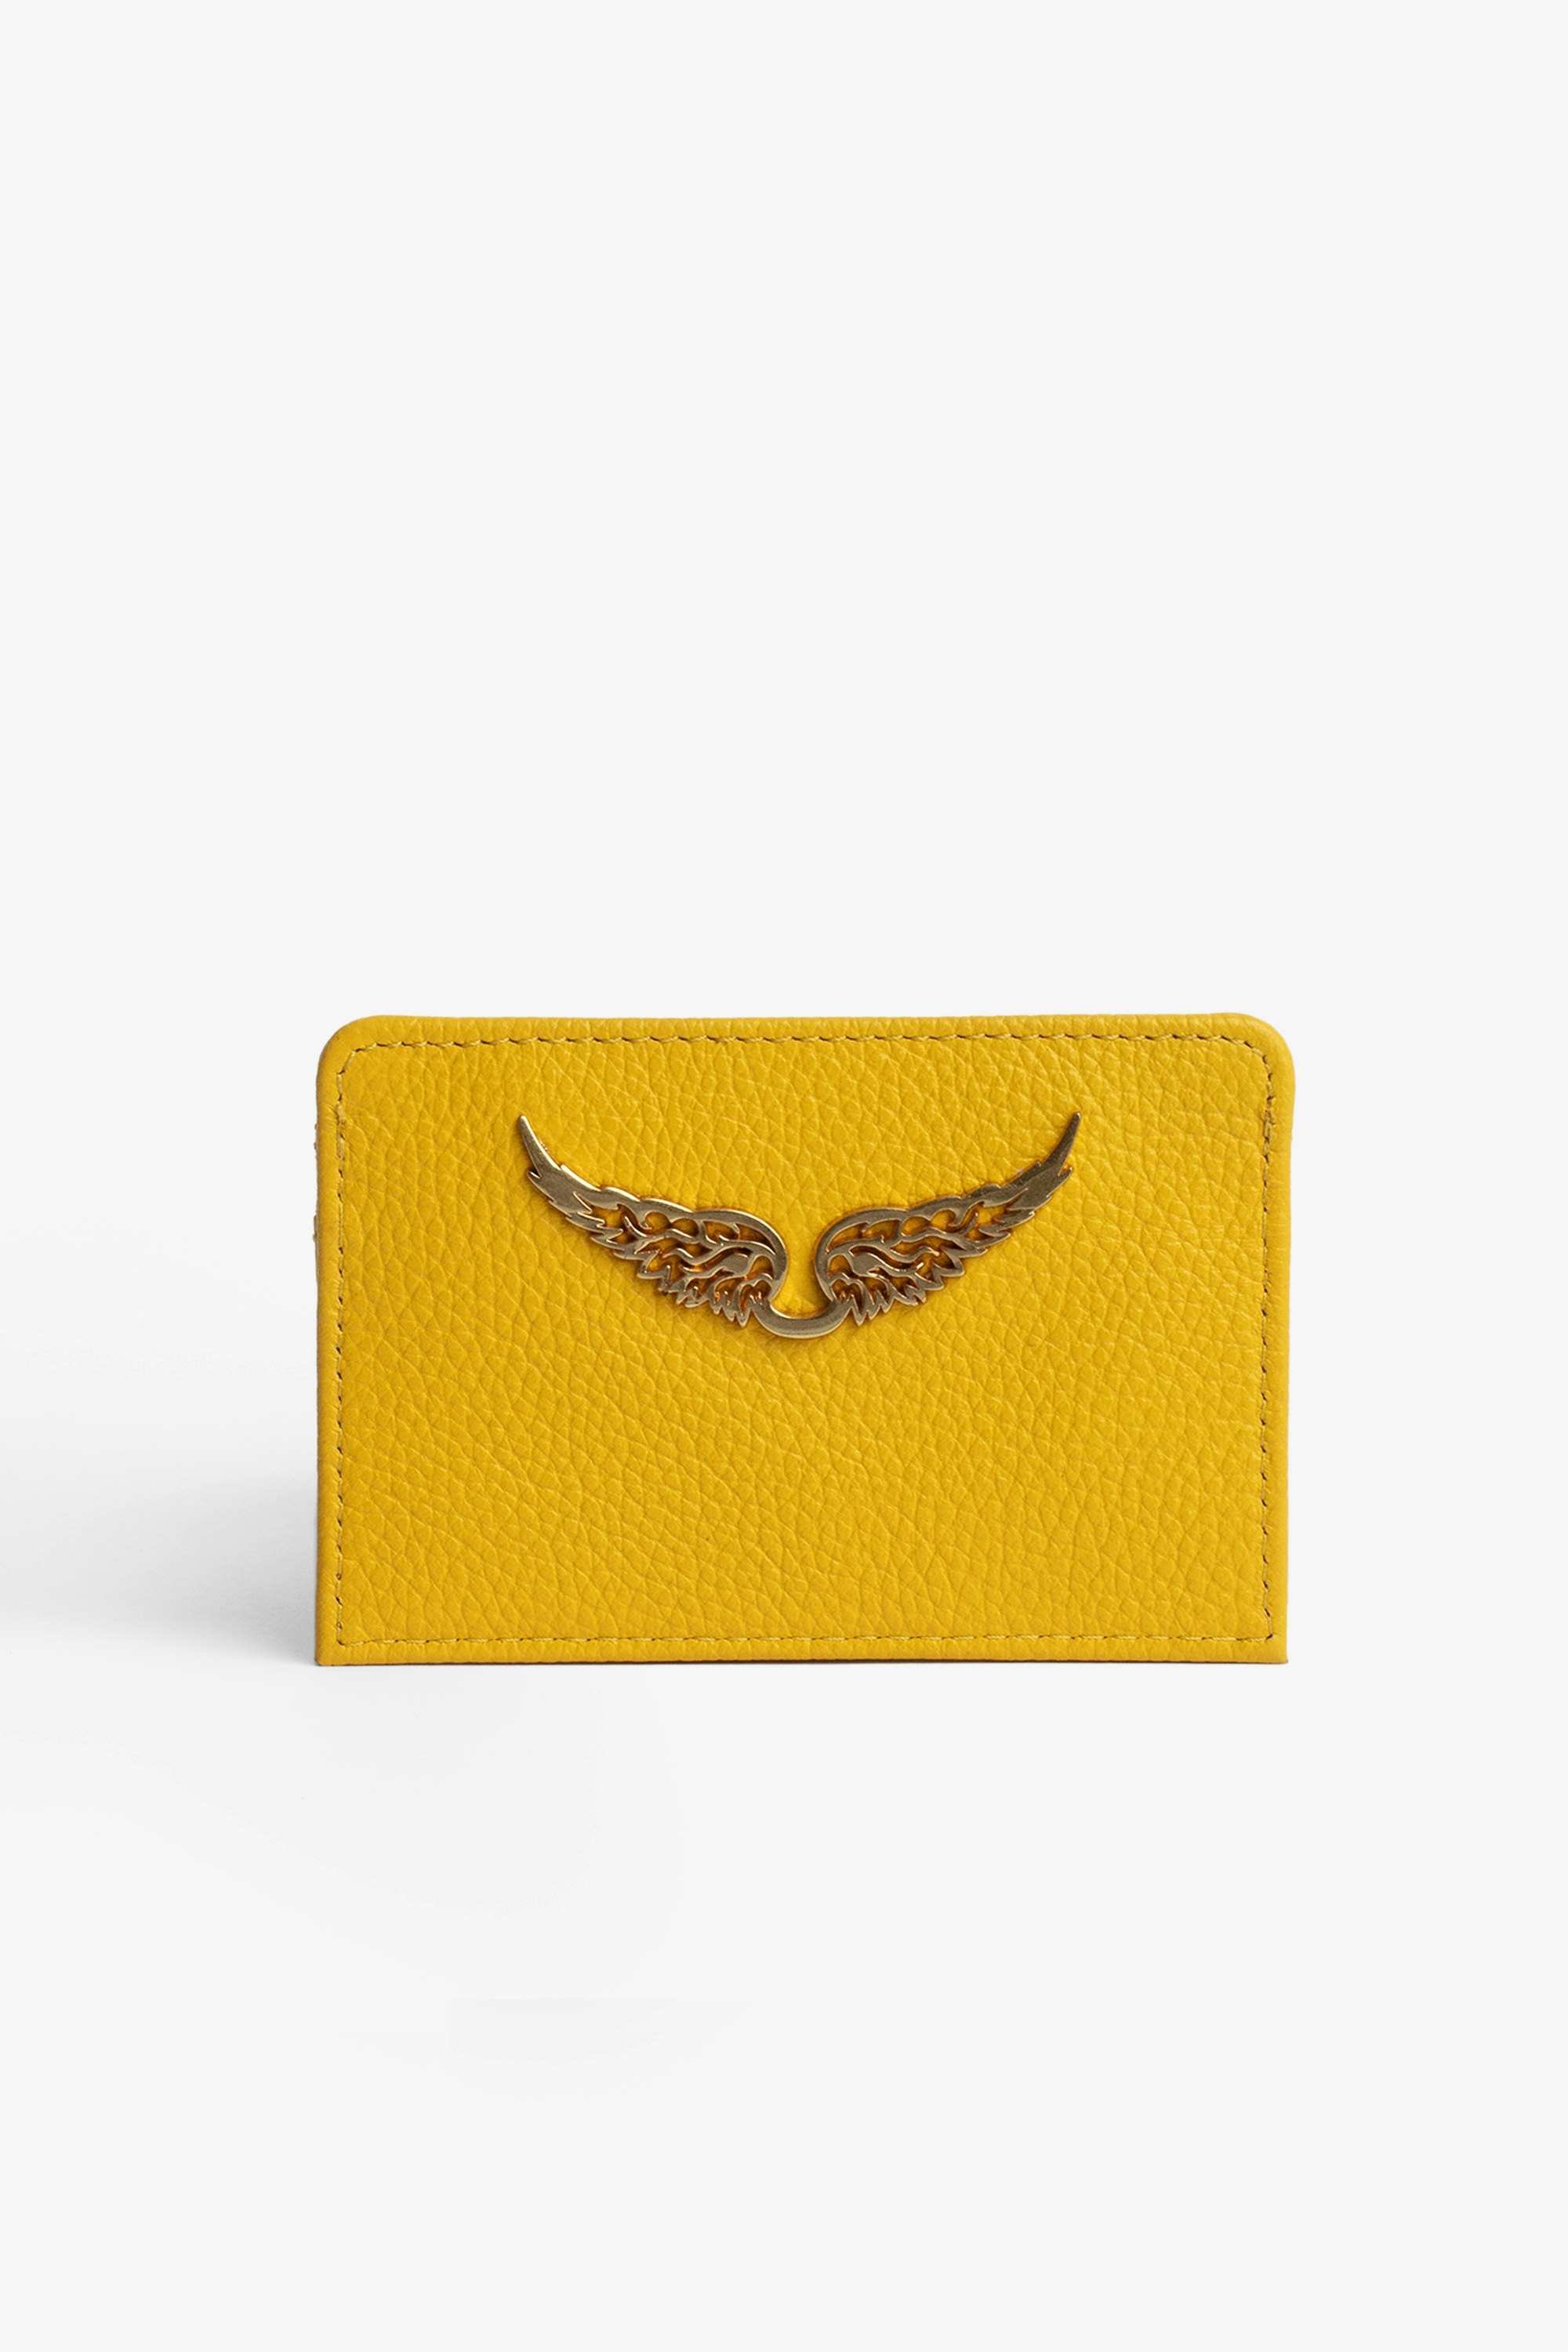 ZV Pass 財布 Women’s card holder in yellow grained leather